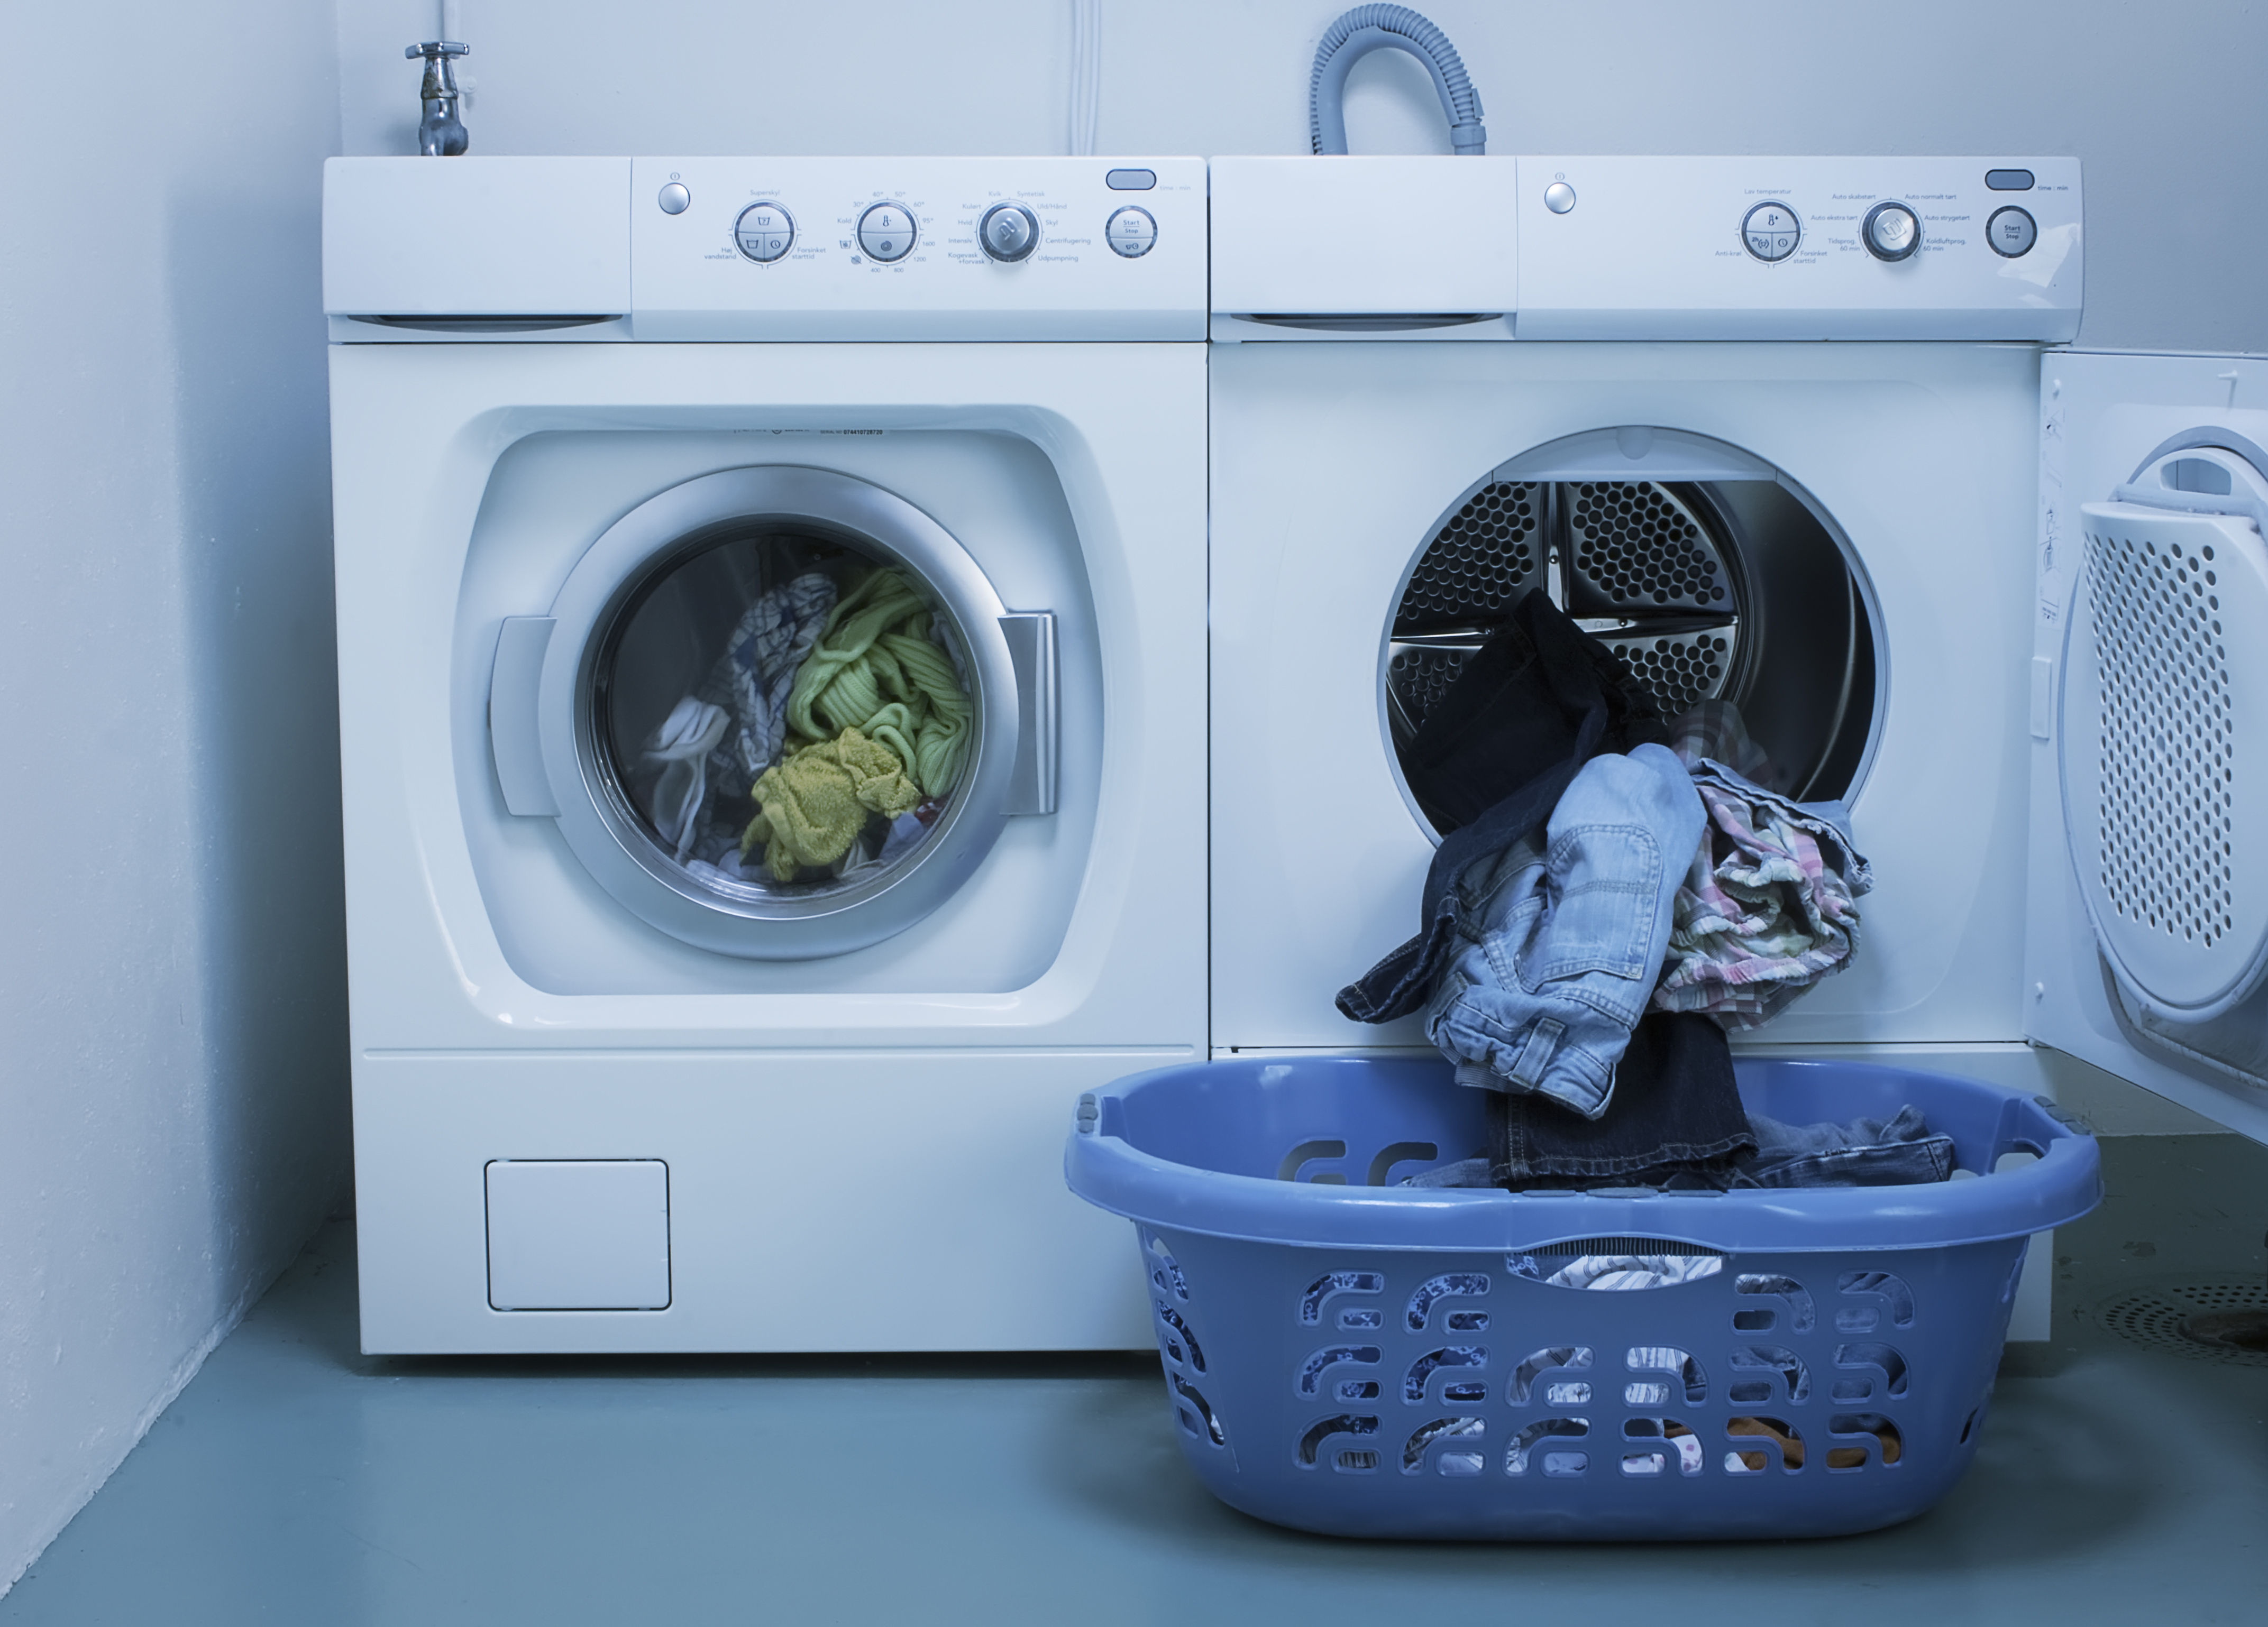 A simple item can cut the clothes' drying time by half and save on energy bills